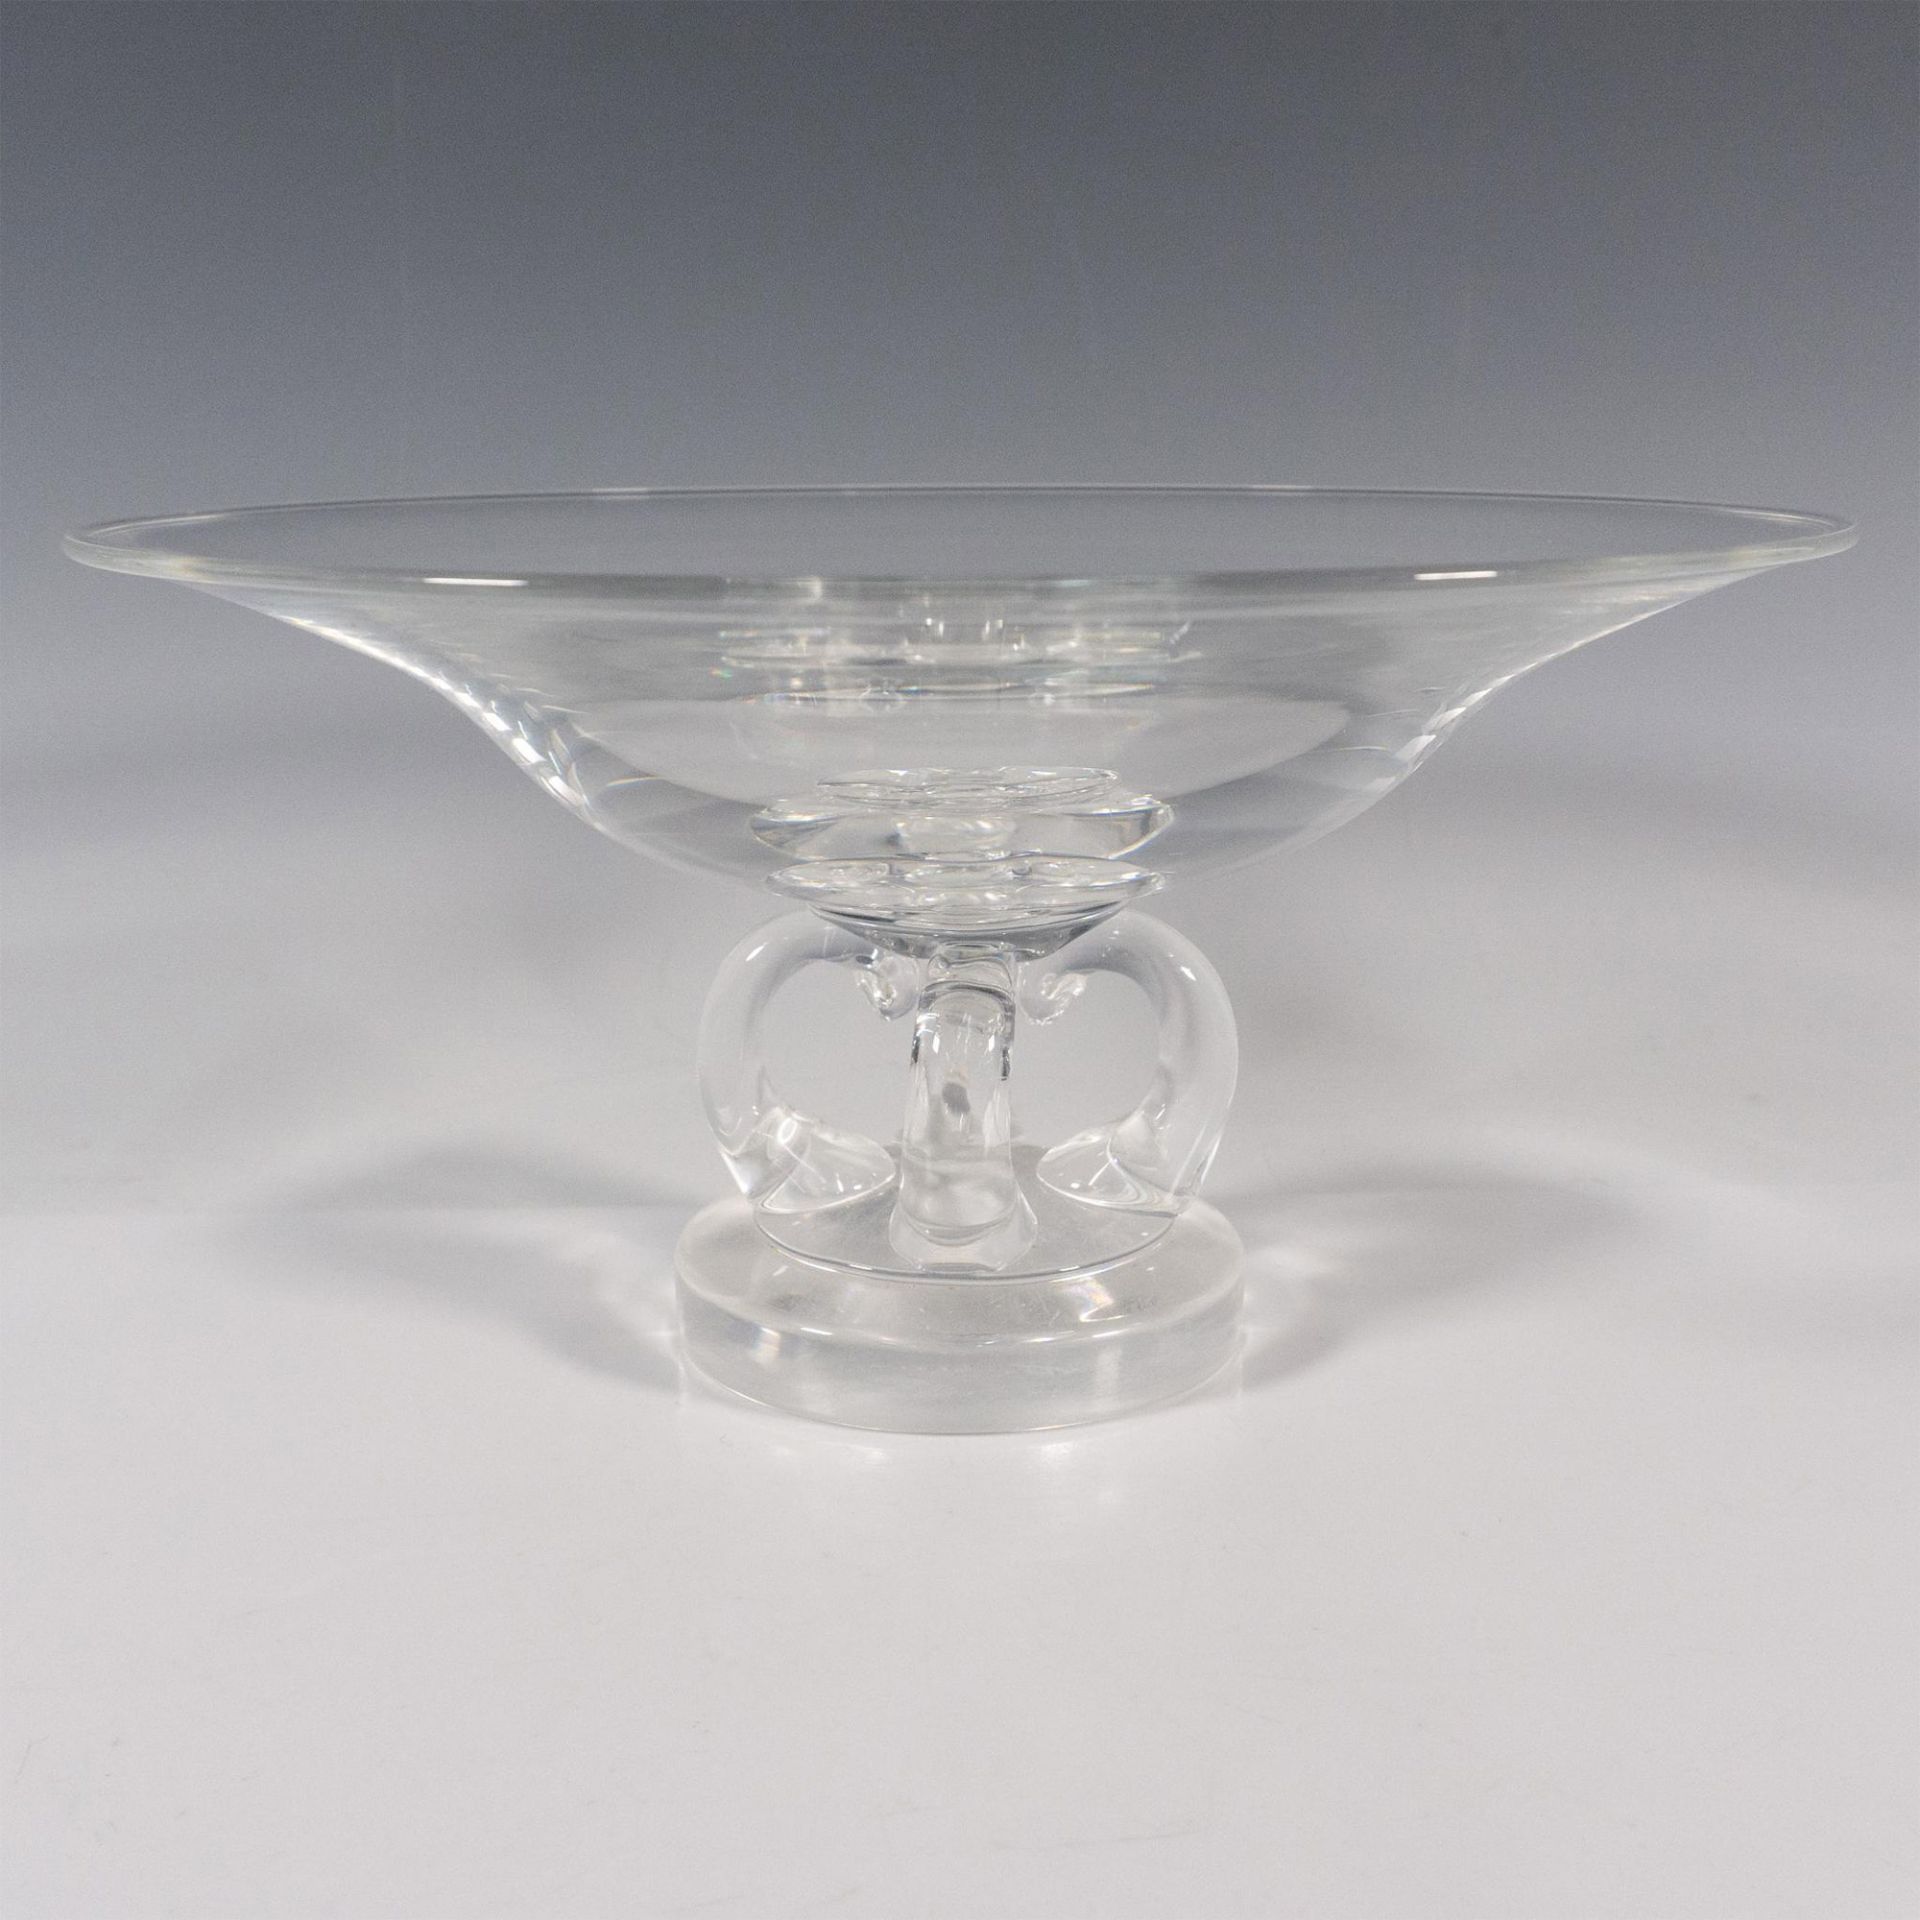 Steuben by George Thompson Glass Footed Centerpiece Bowl